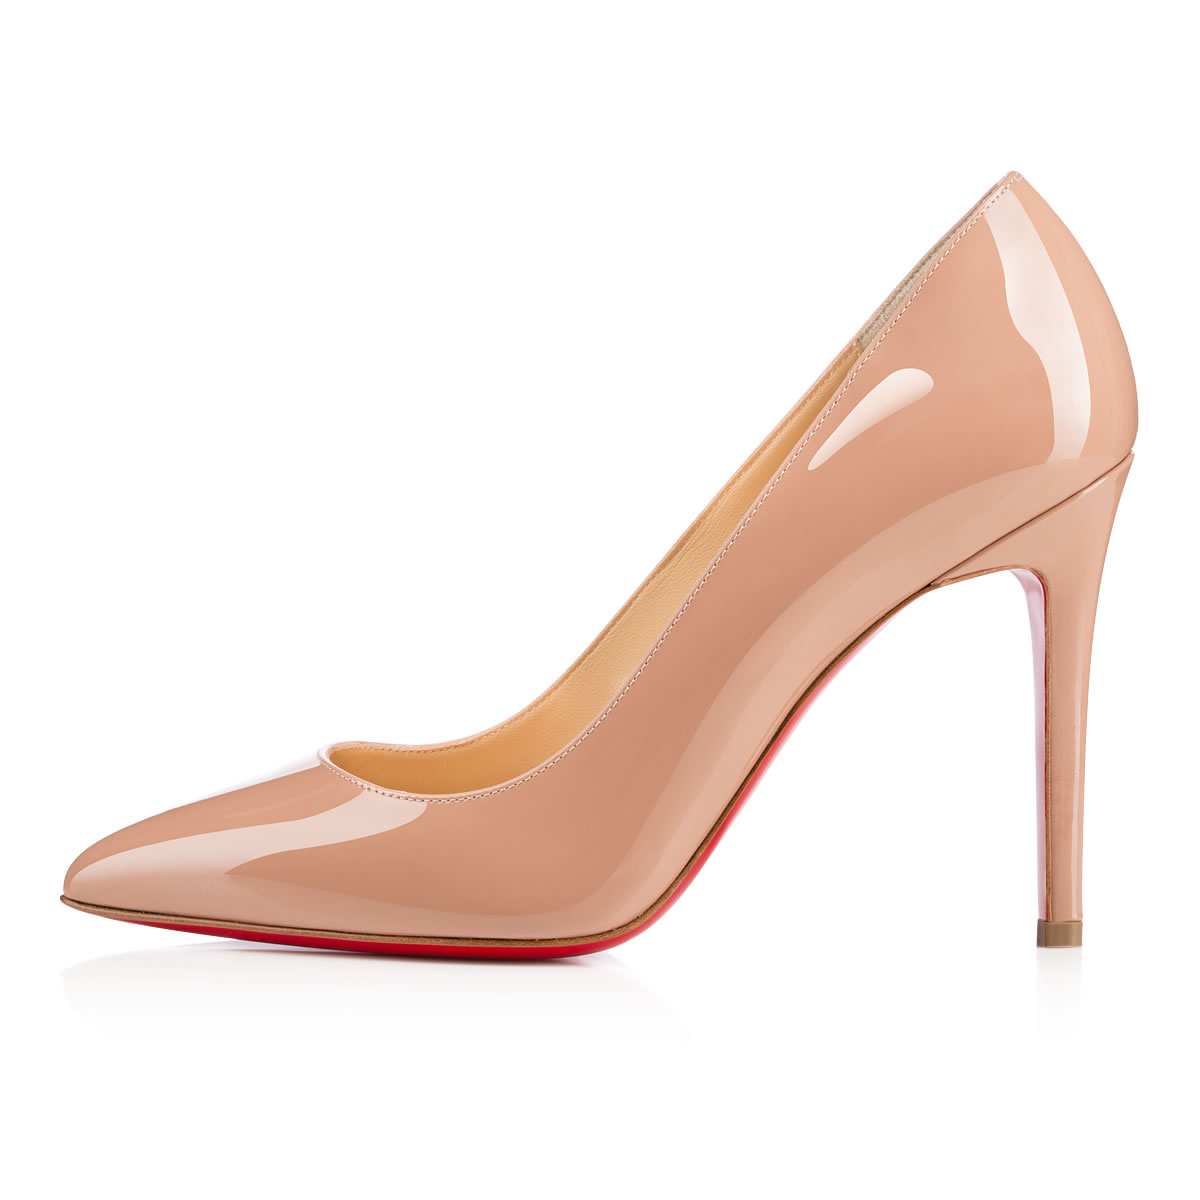 Pigalle - mm Pumps - Patent calf - Nude - Christian Louboutin